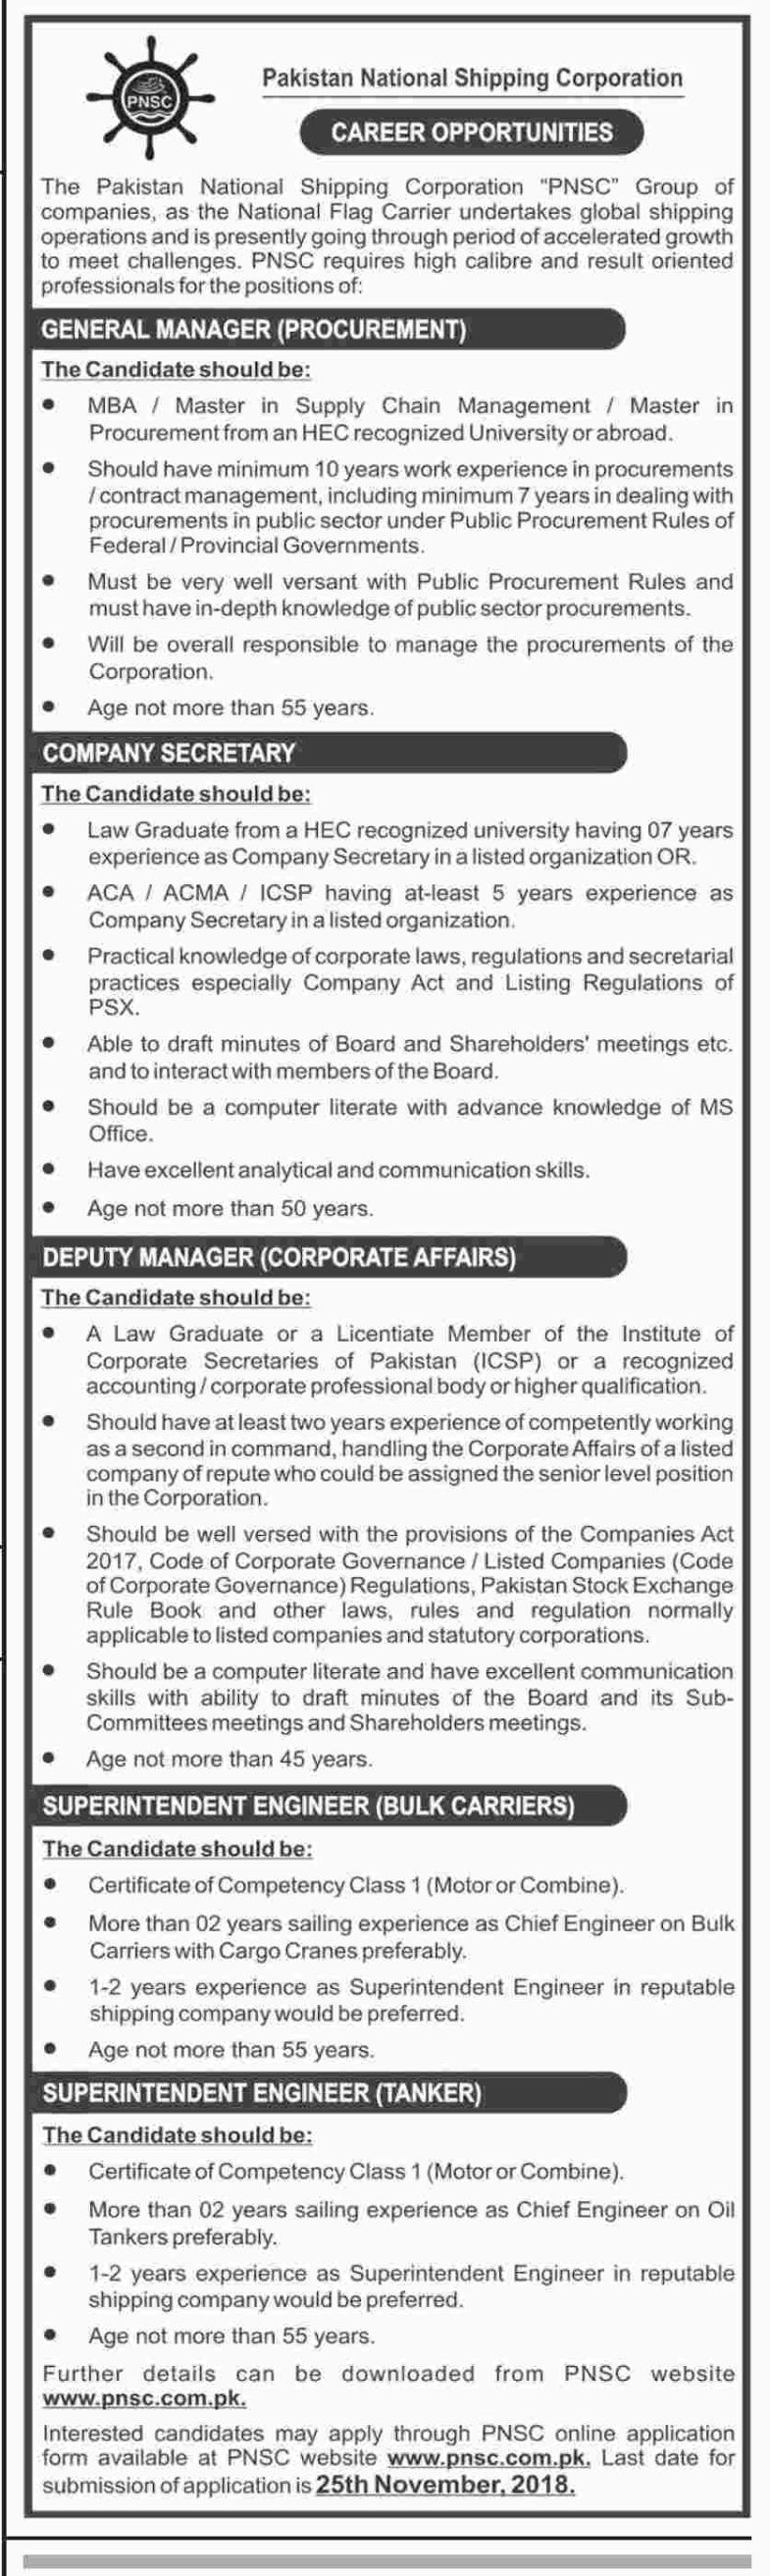 Pakistan National Shipping Corporation (PNSC) Jobs 2018 for GM Procurement, Secretary, Dy Manager & Engineering Posts 12 November, 2018